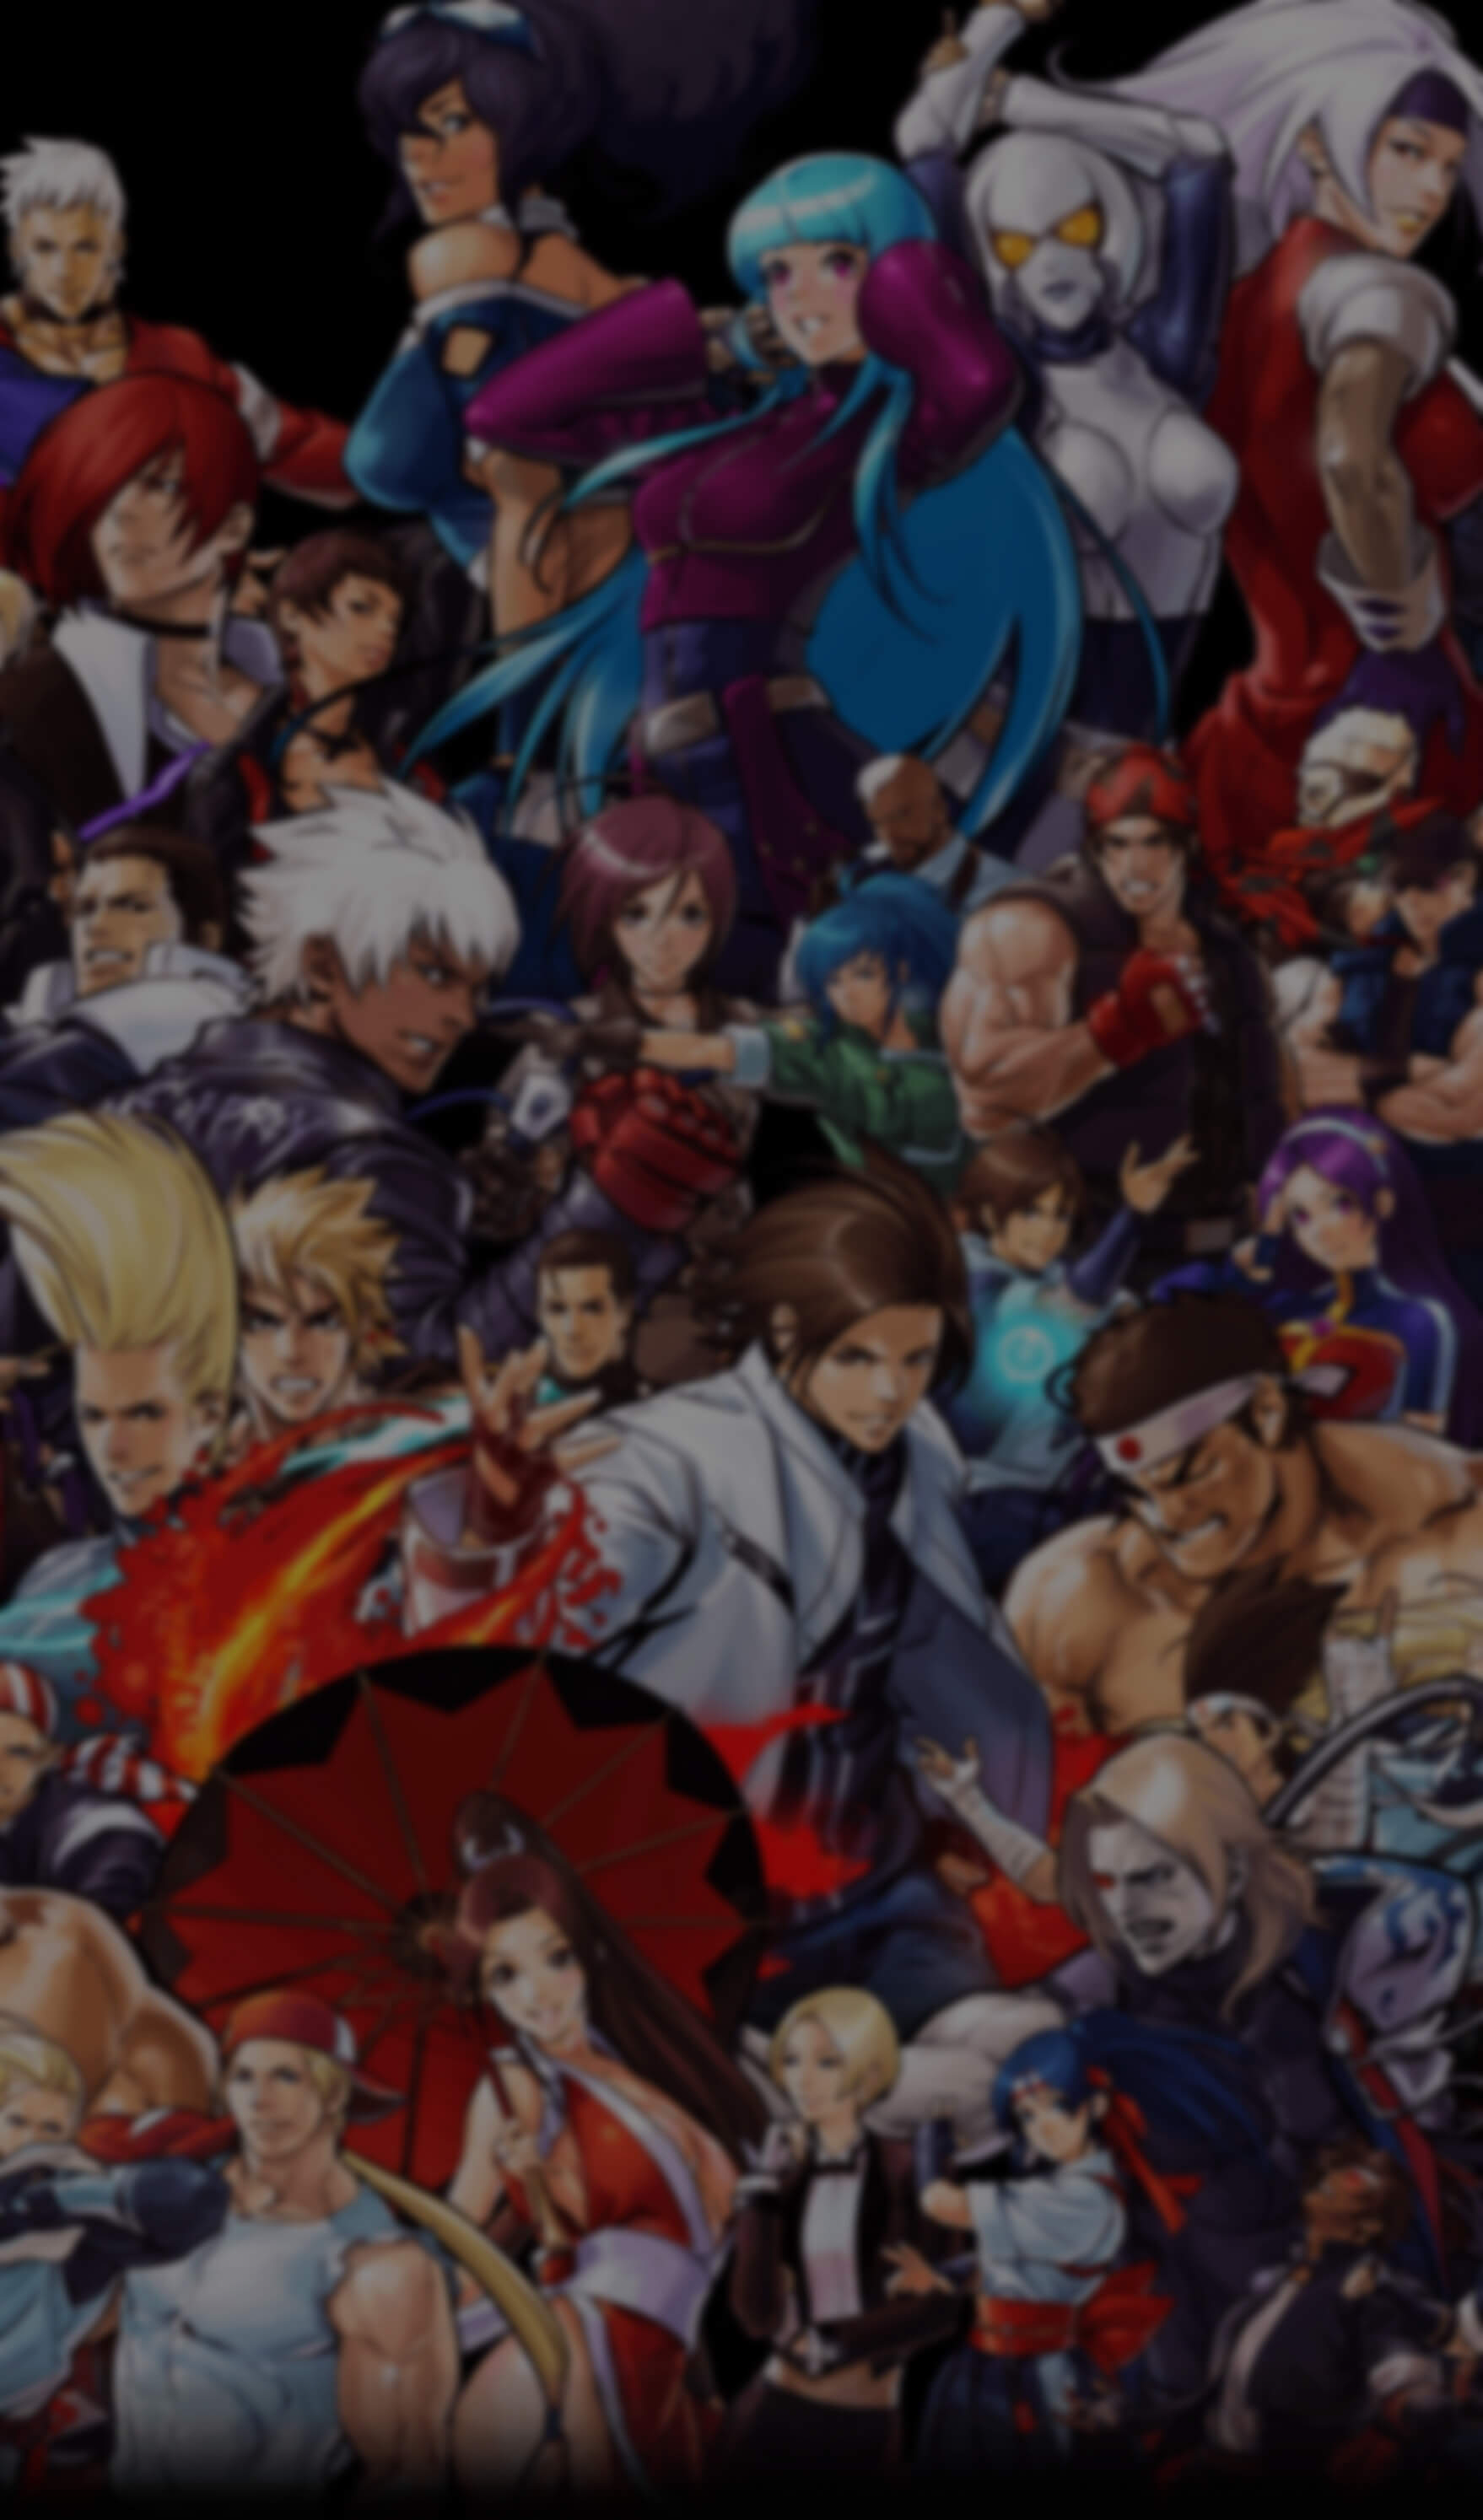 ABOUT KOF  THE KING OF FIGHTERS PORTAL SITE